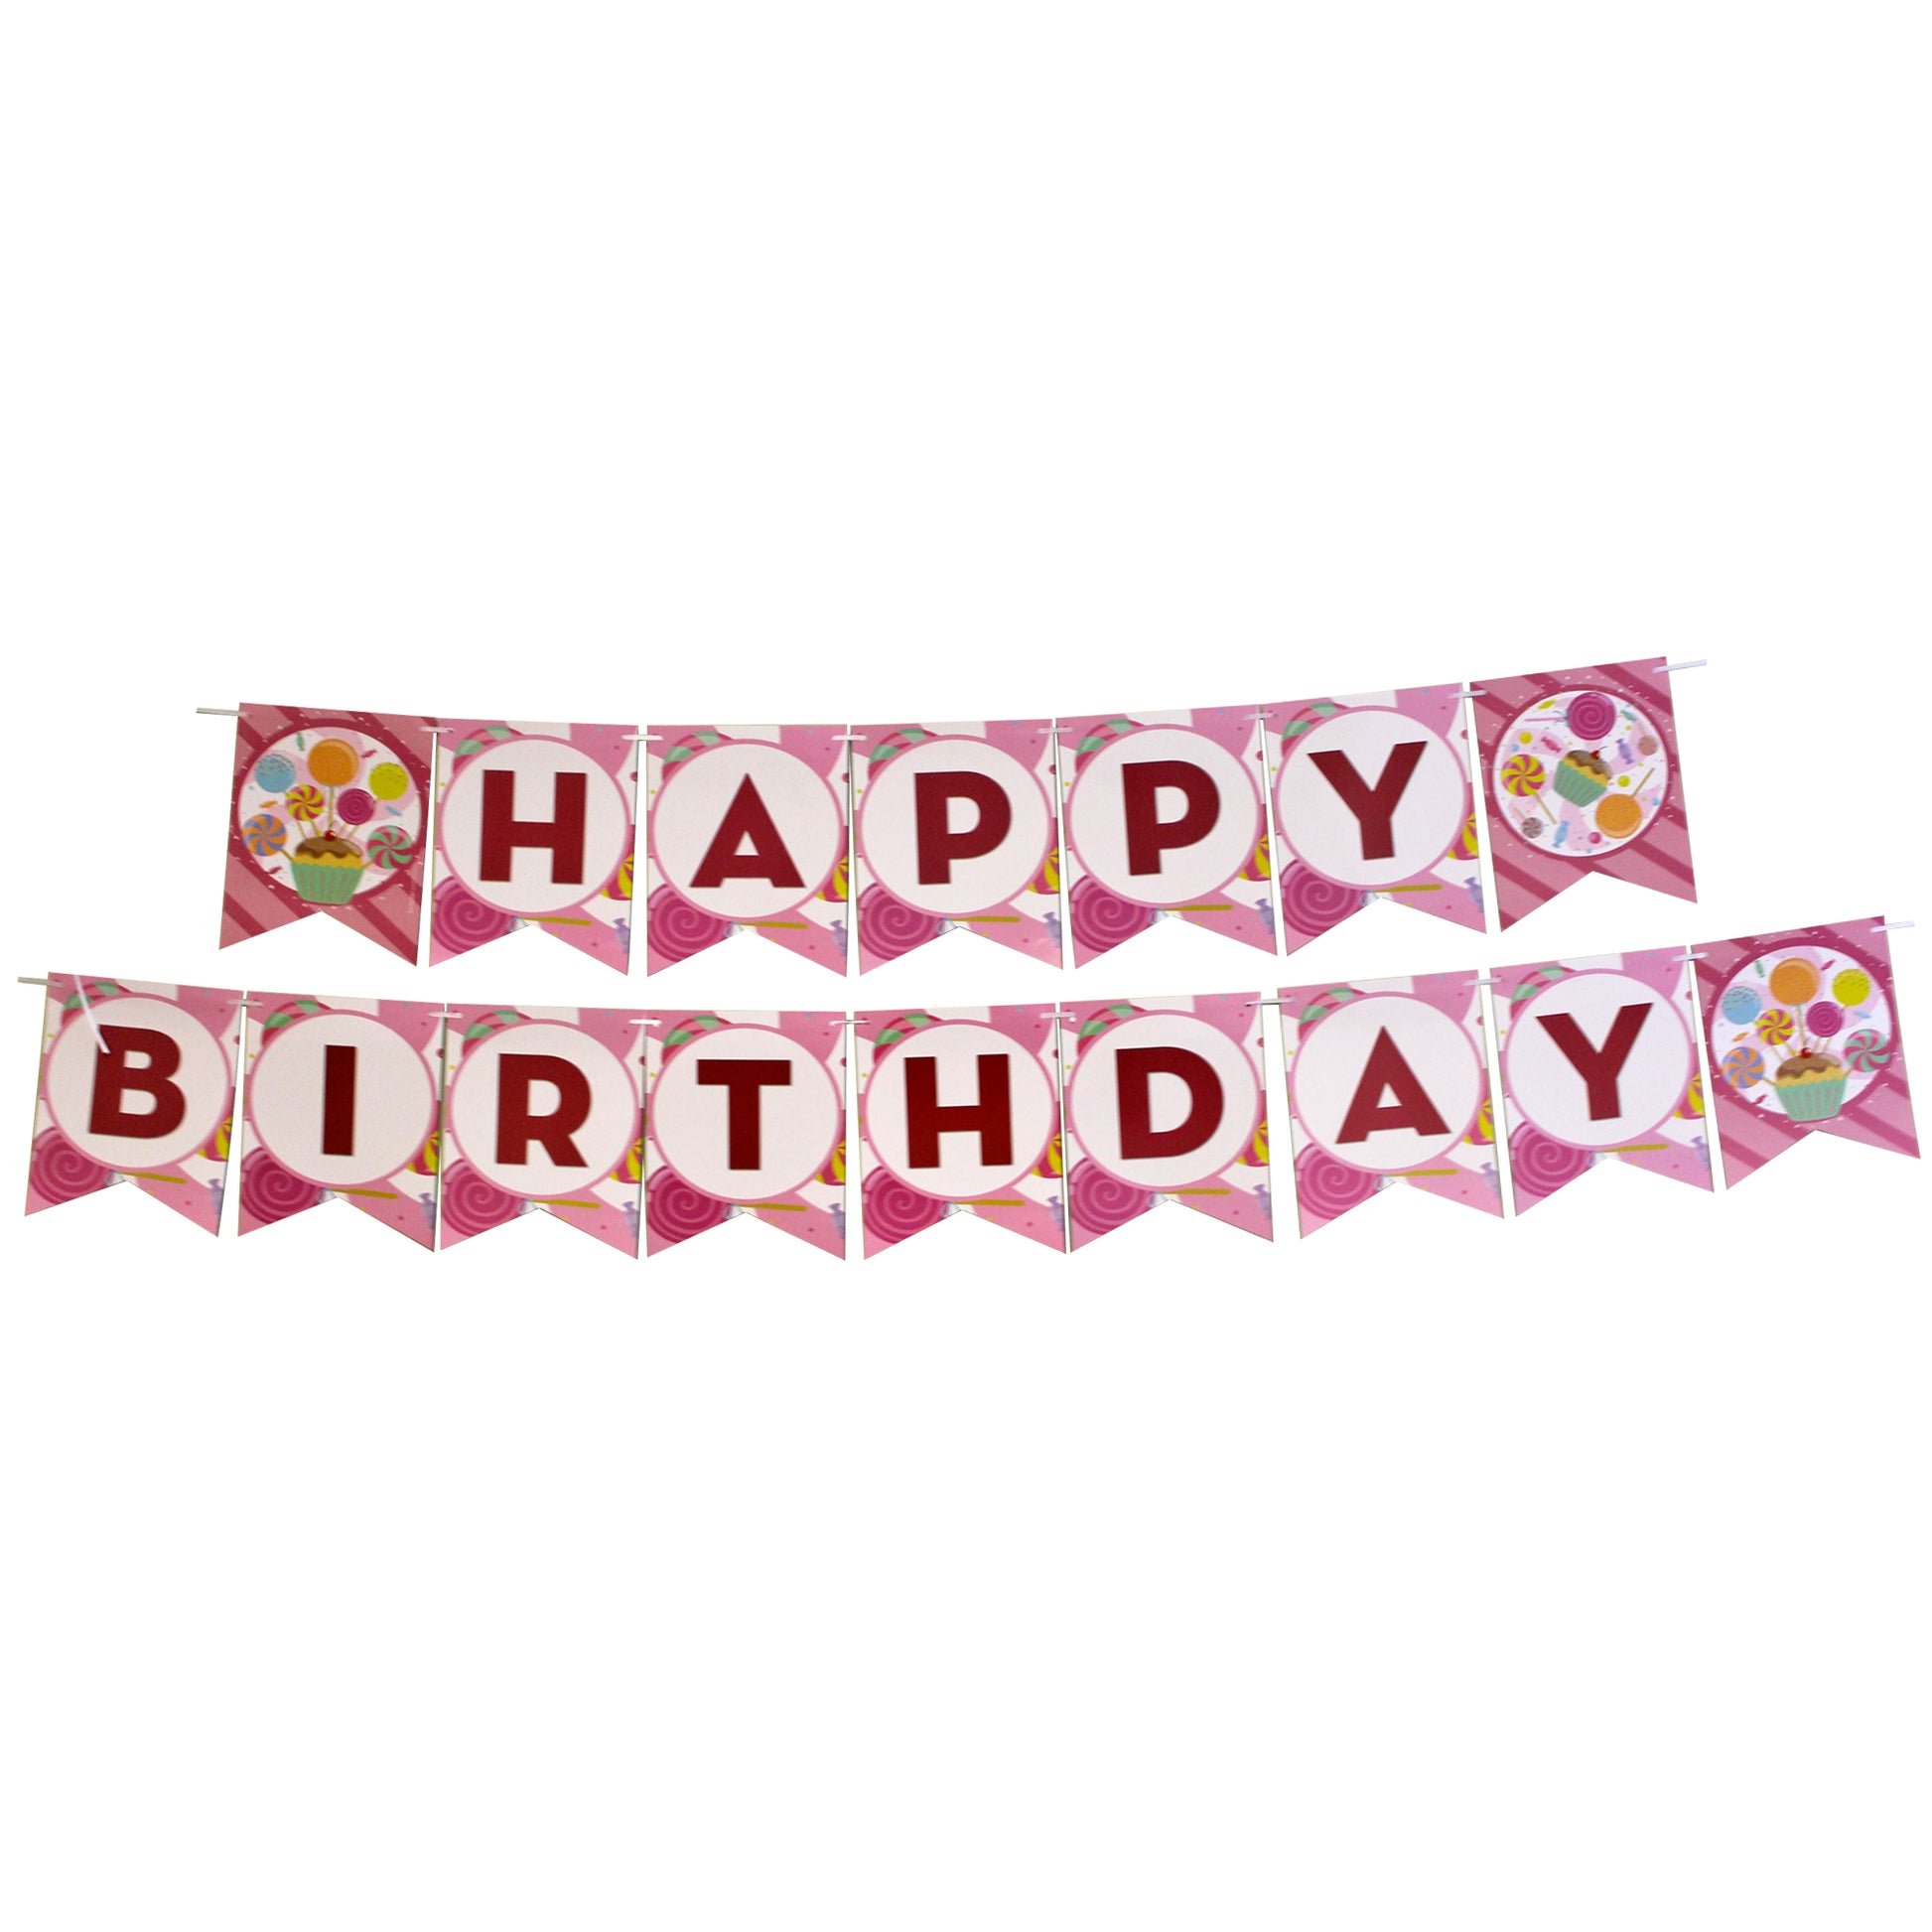 Candyland Party Banner, Candy Party Banner, Candy Banner, Ice Cream Party Banner, Candyland Birthday Party Banner